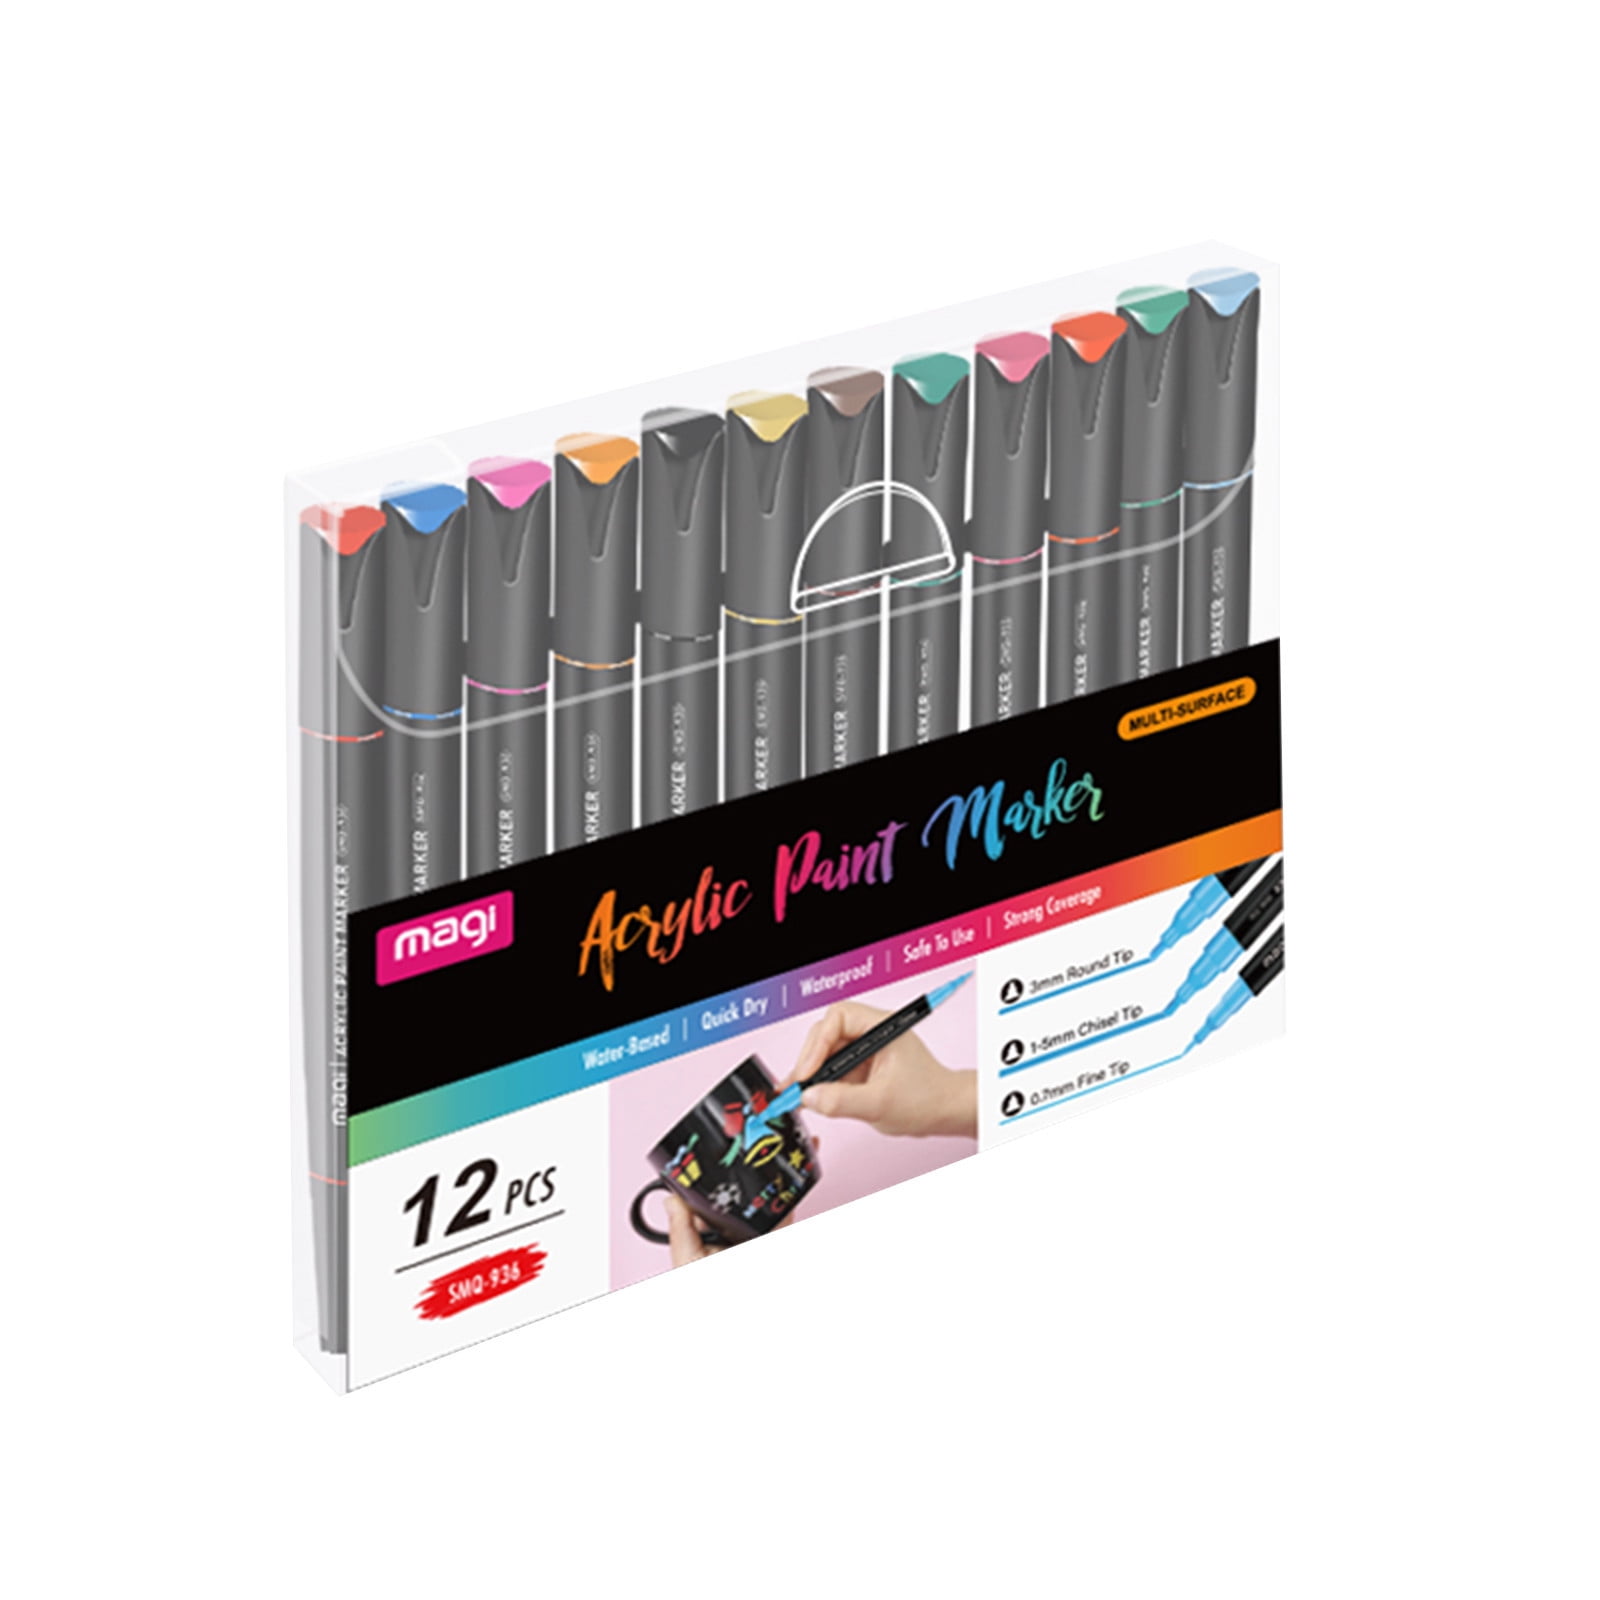 36 Acrylic Paint Pens Skin and Earth Tones Marker Set 3mm Medium Tip for Rock Painting, Canvas, Most surfaces. Non-Toxic, Quick Dry